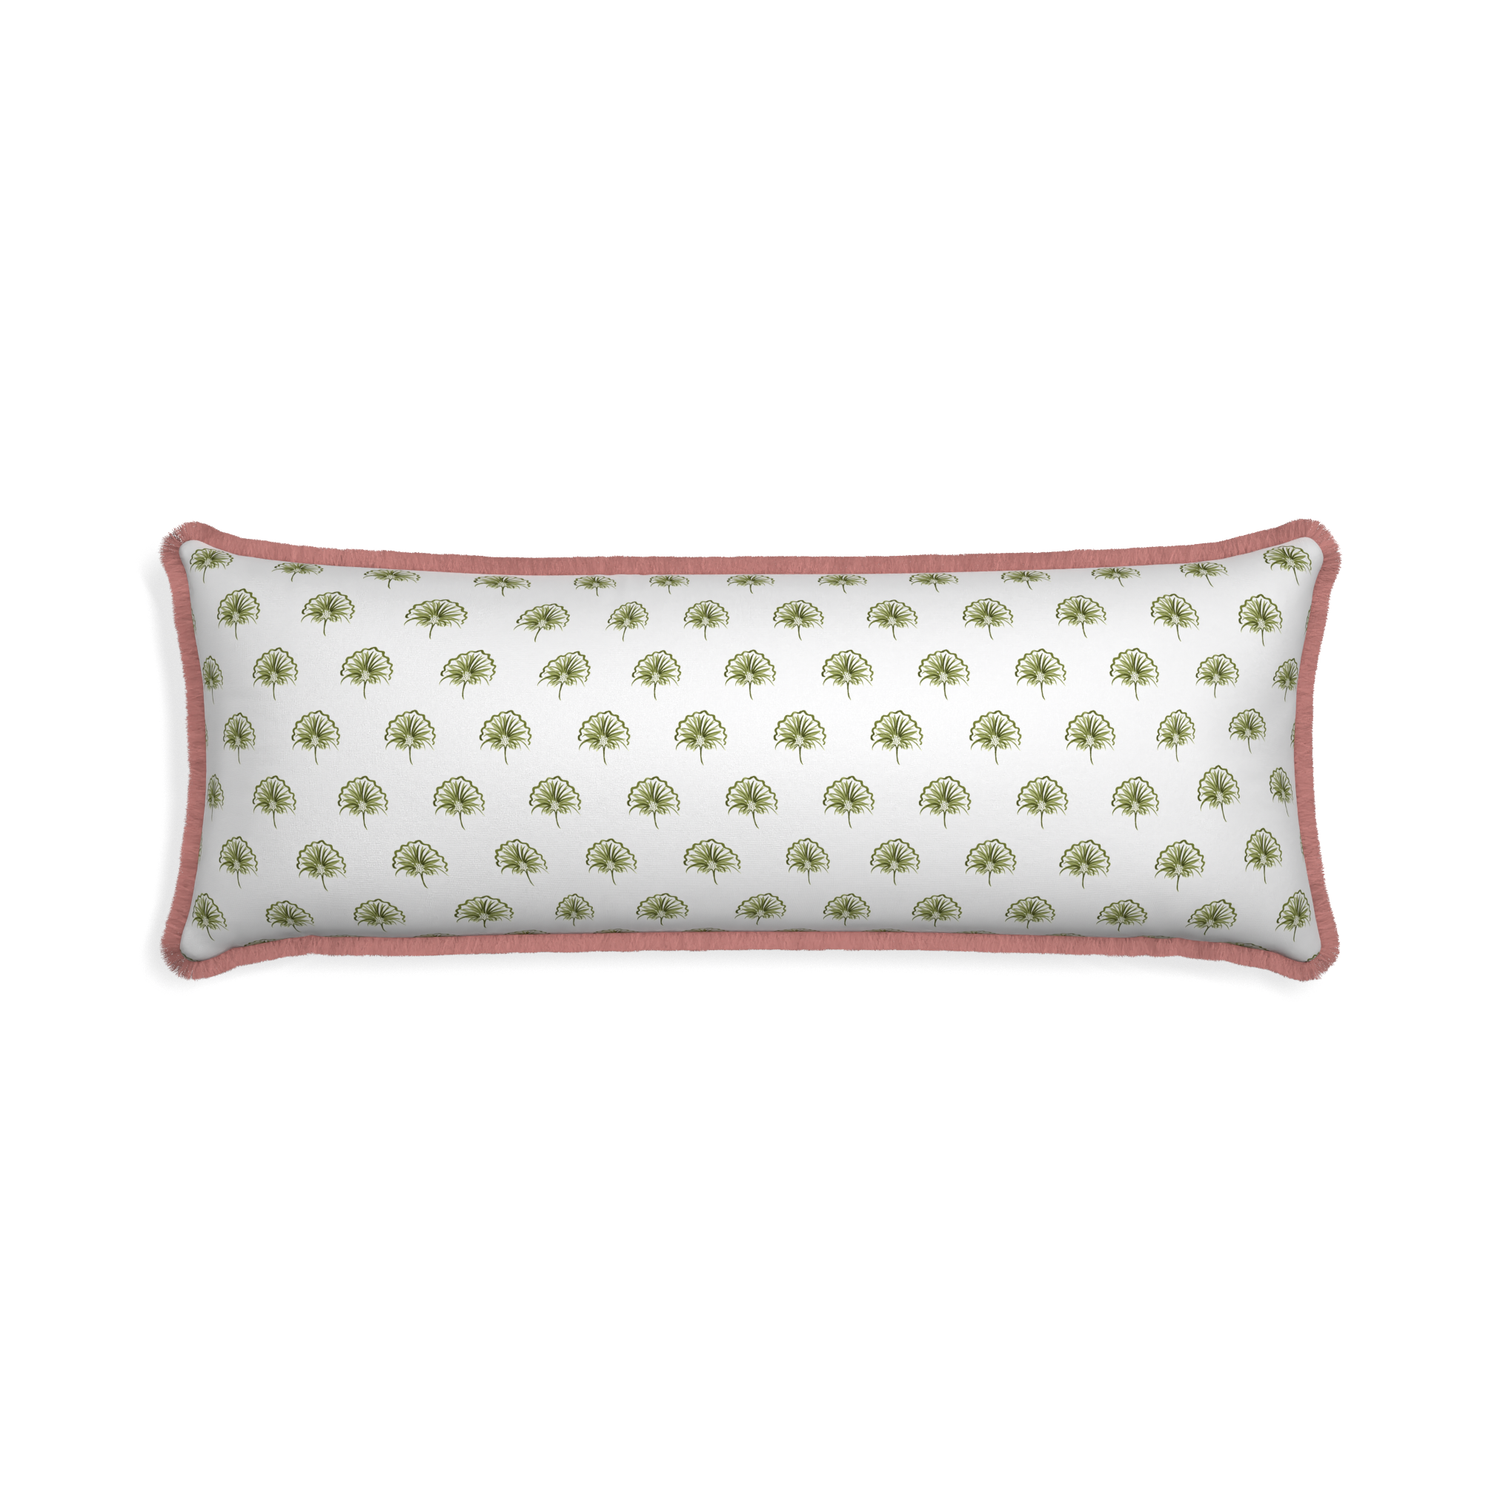 Xl-lumbar penelope moss custom green floralpillow with d fringe on white background